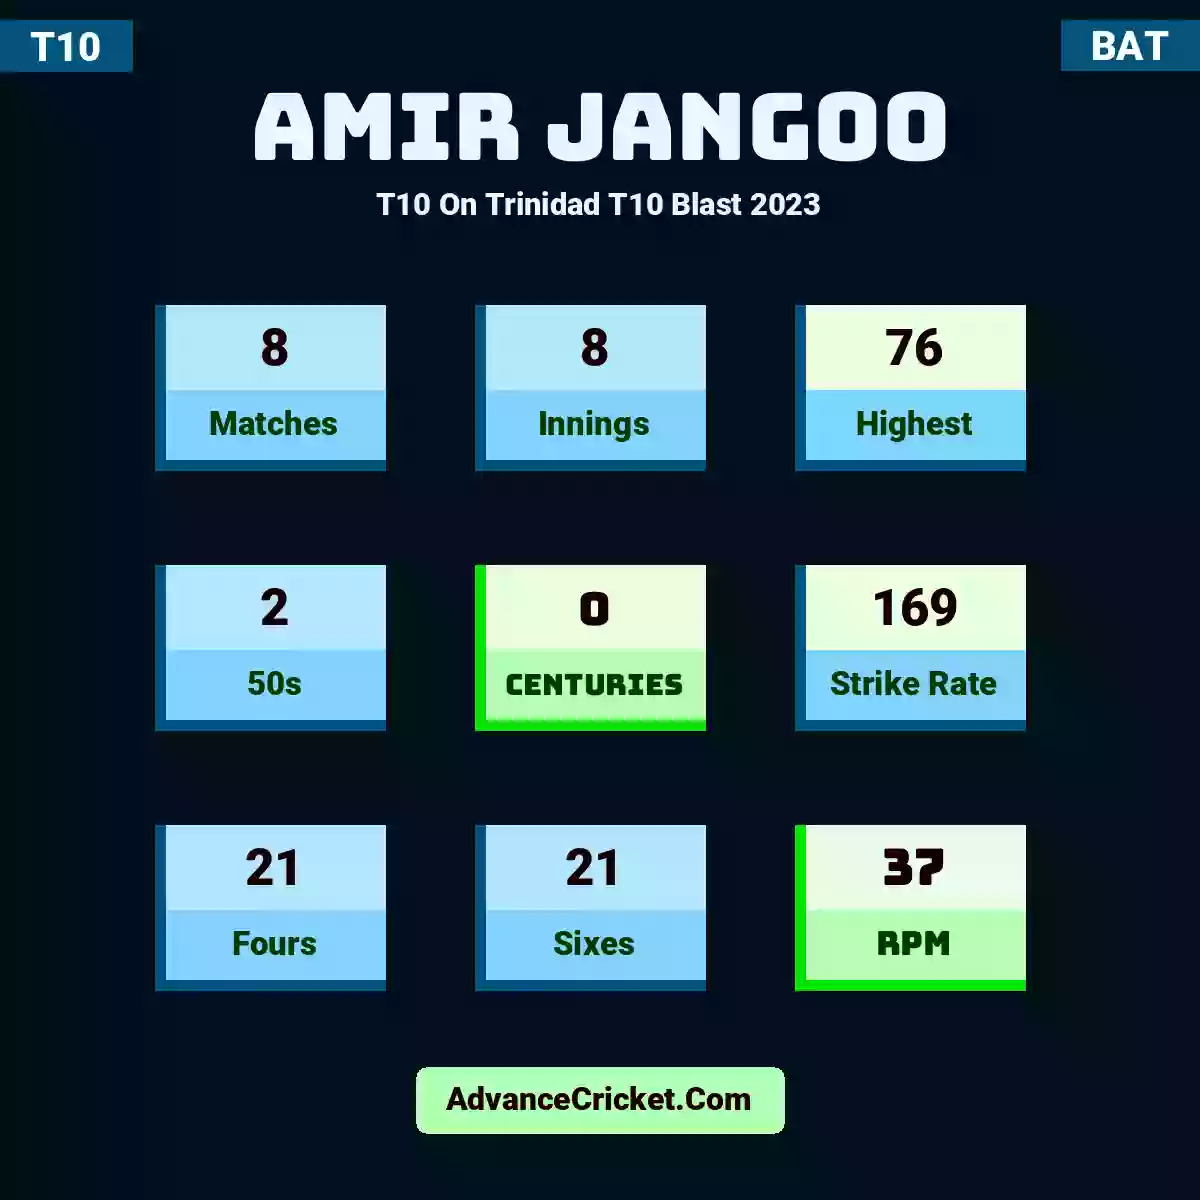 Amir Jangoo T10  On Trinidad T10 Blast 2023, Amir Jangoo played 8 matches, scored 76 runs as highest, 2 half-centuries, and 0 centuries, with a strike rate of 169. A.Jangoo hit 21 fours and 21 sixes, with an RPM of 37.